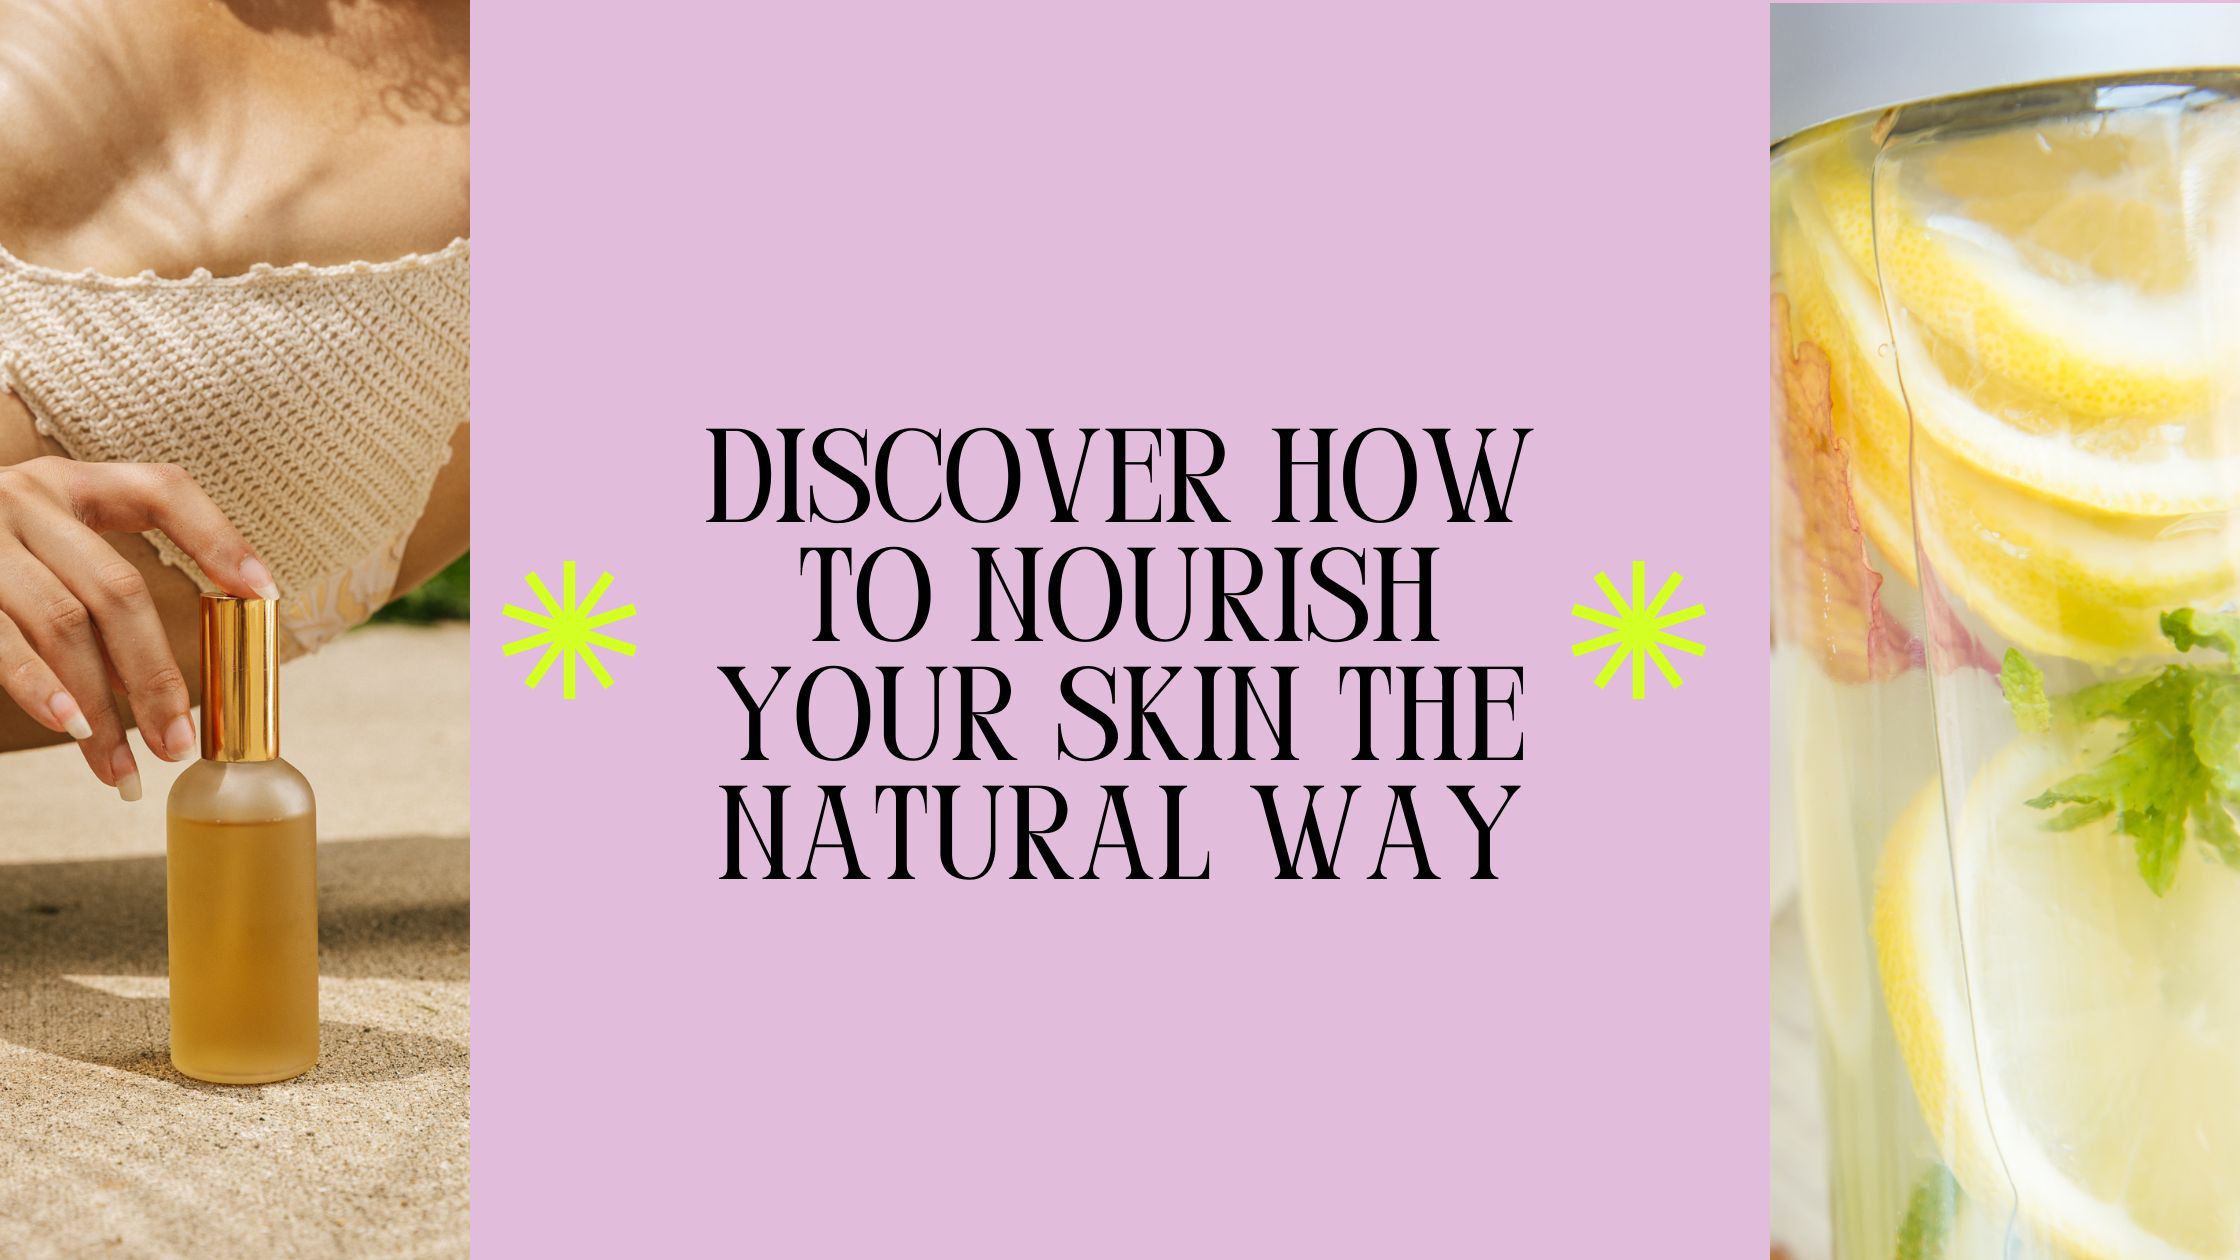 Discover how to nourish your skin the natural way